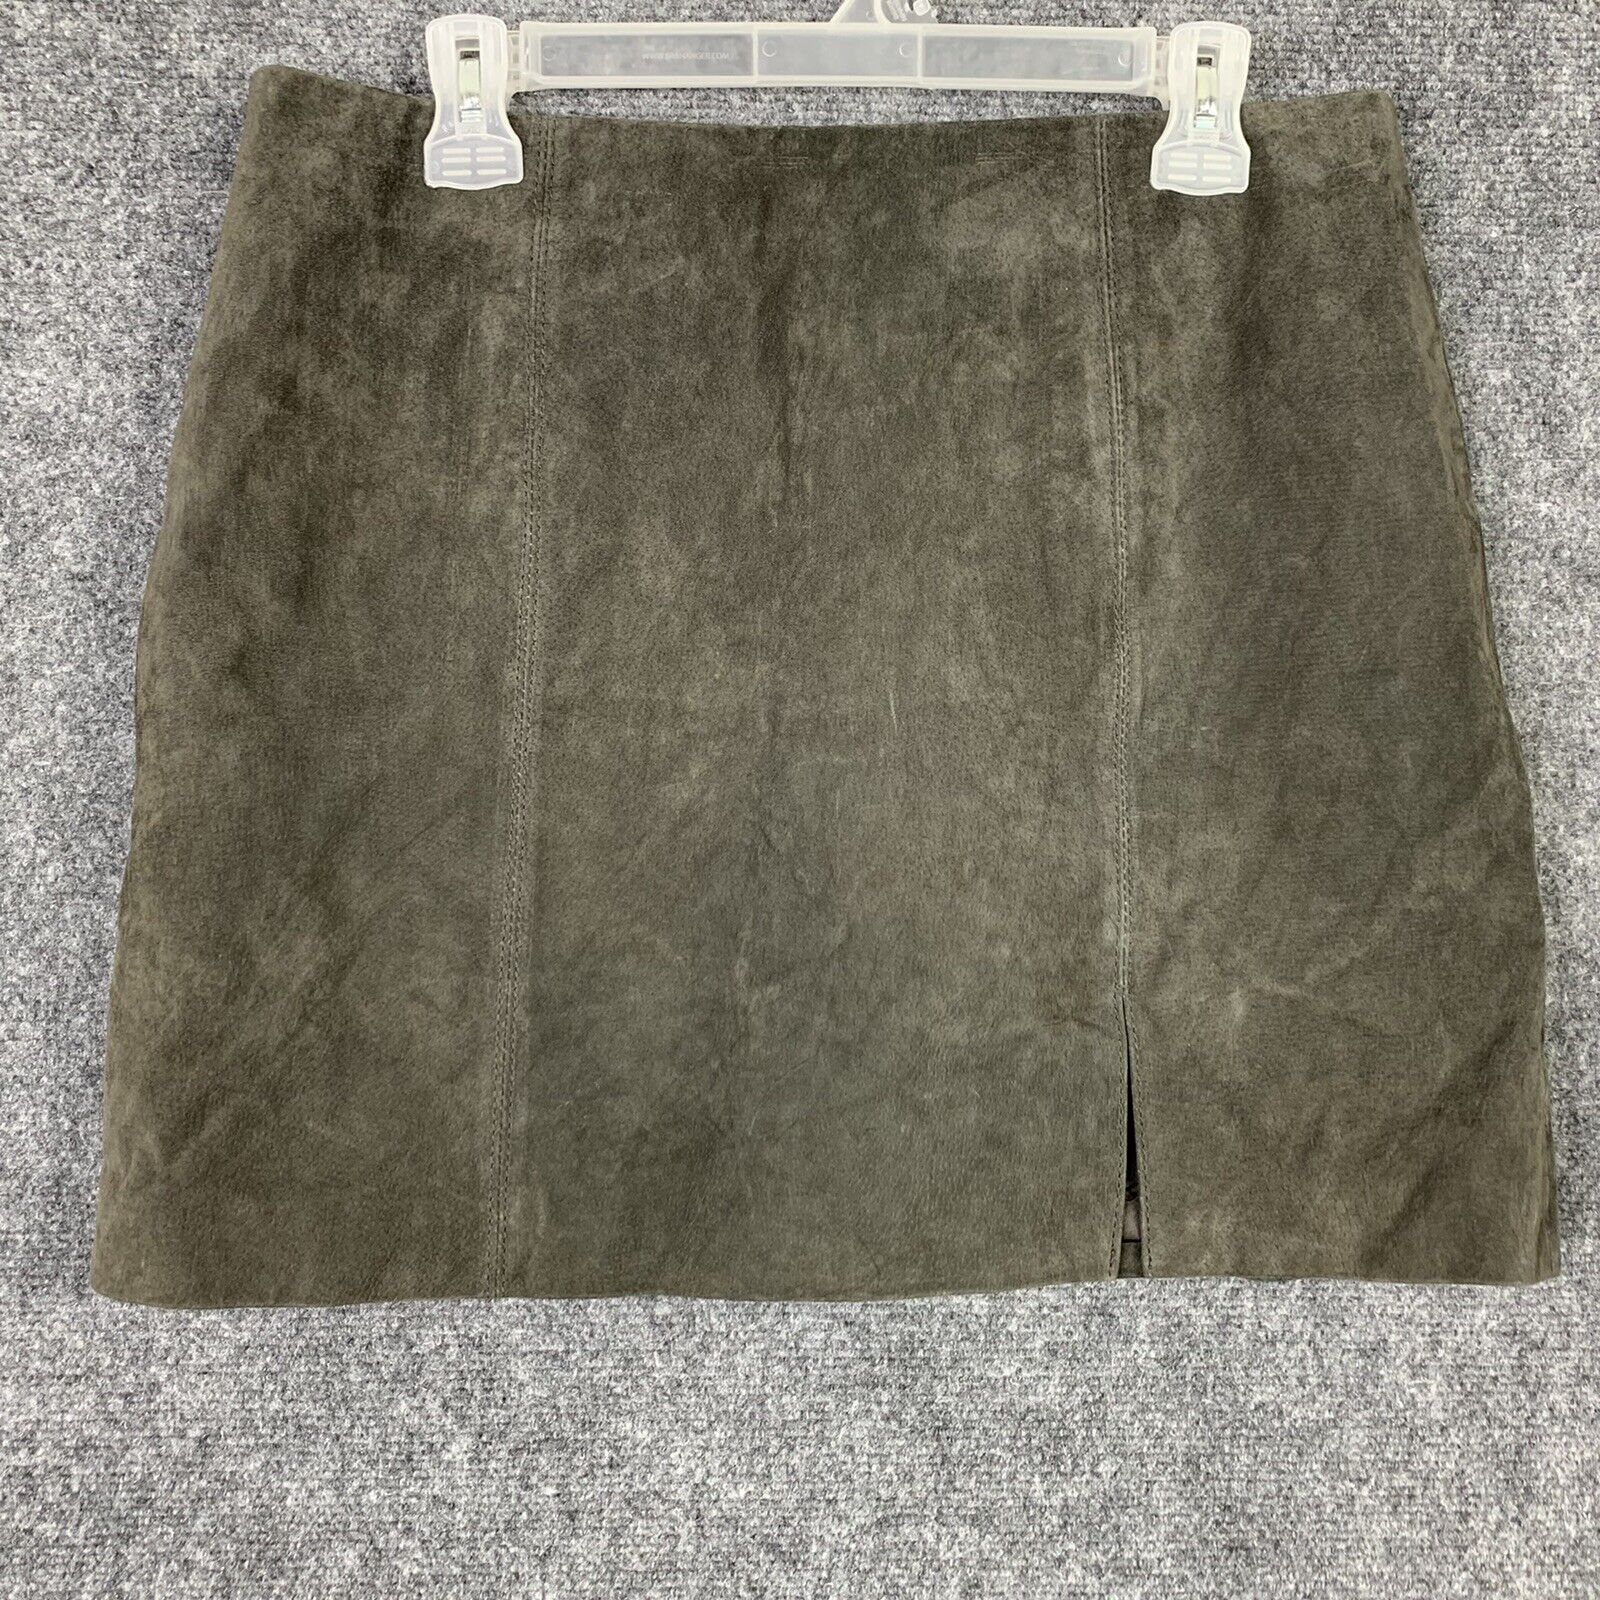 Blank NYC Mini Skirt Gray Suede Leather Exposed B… - image 11